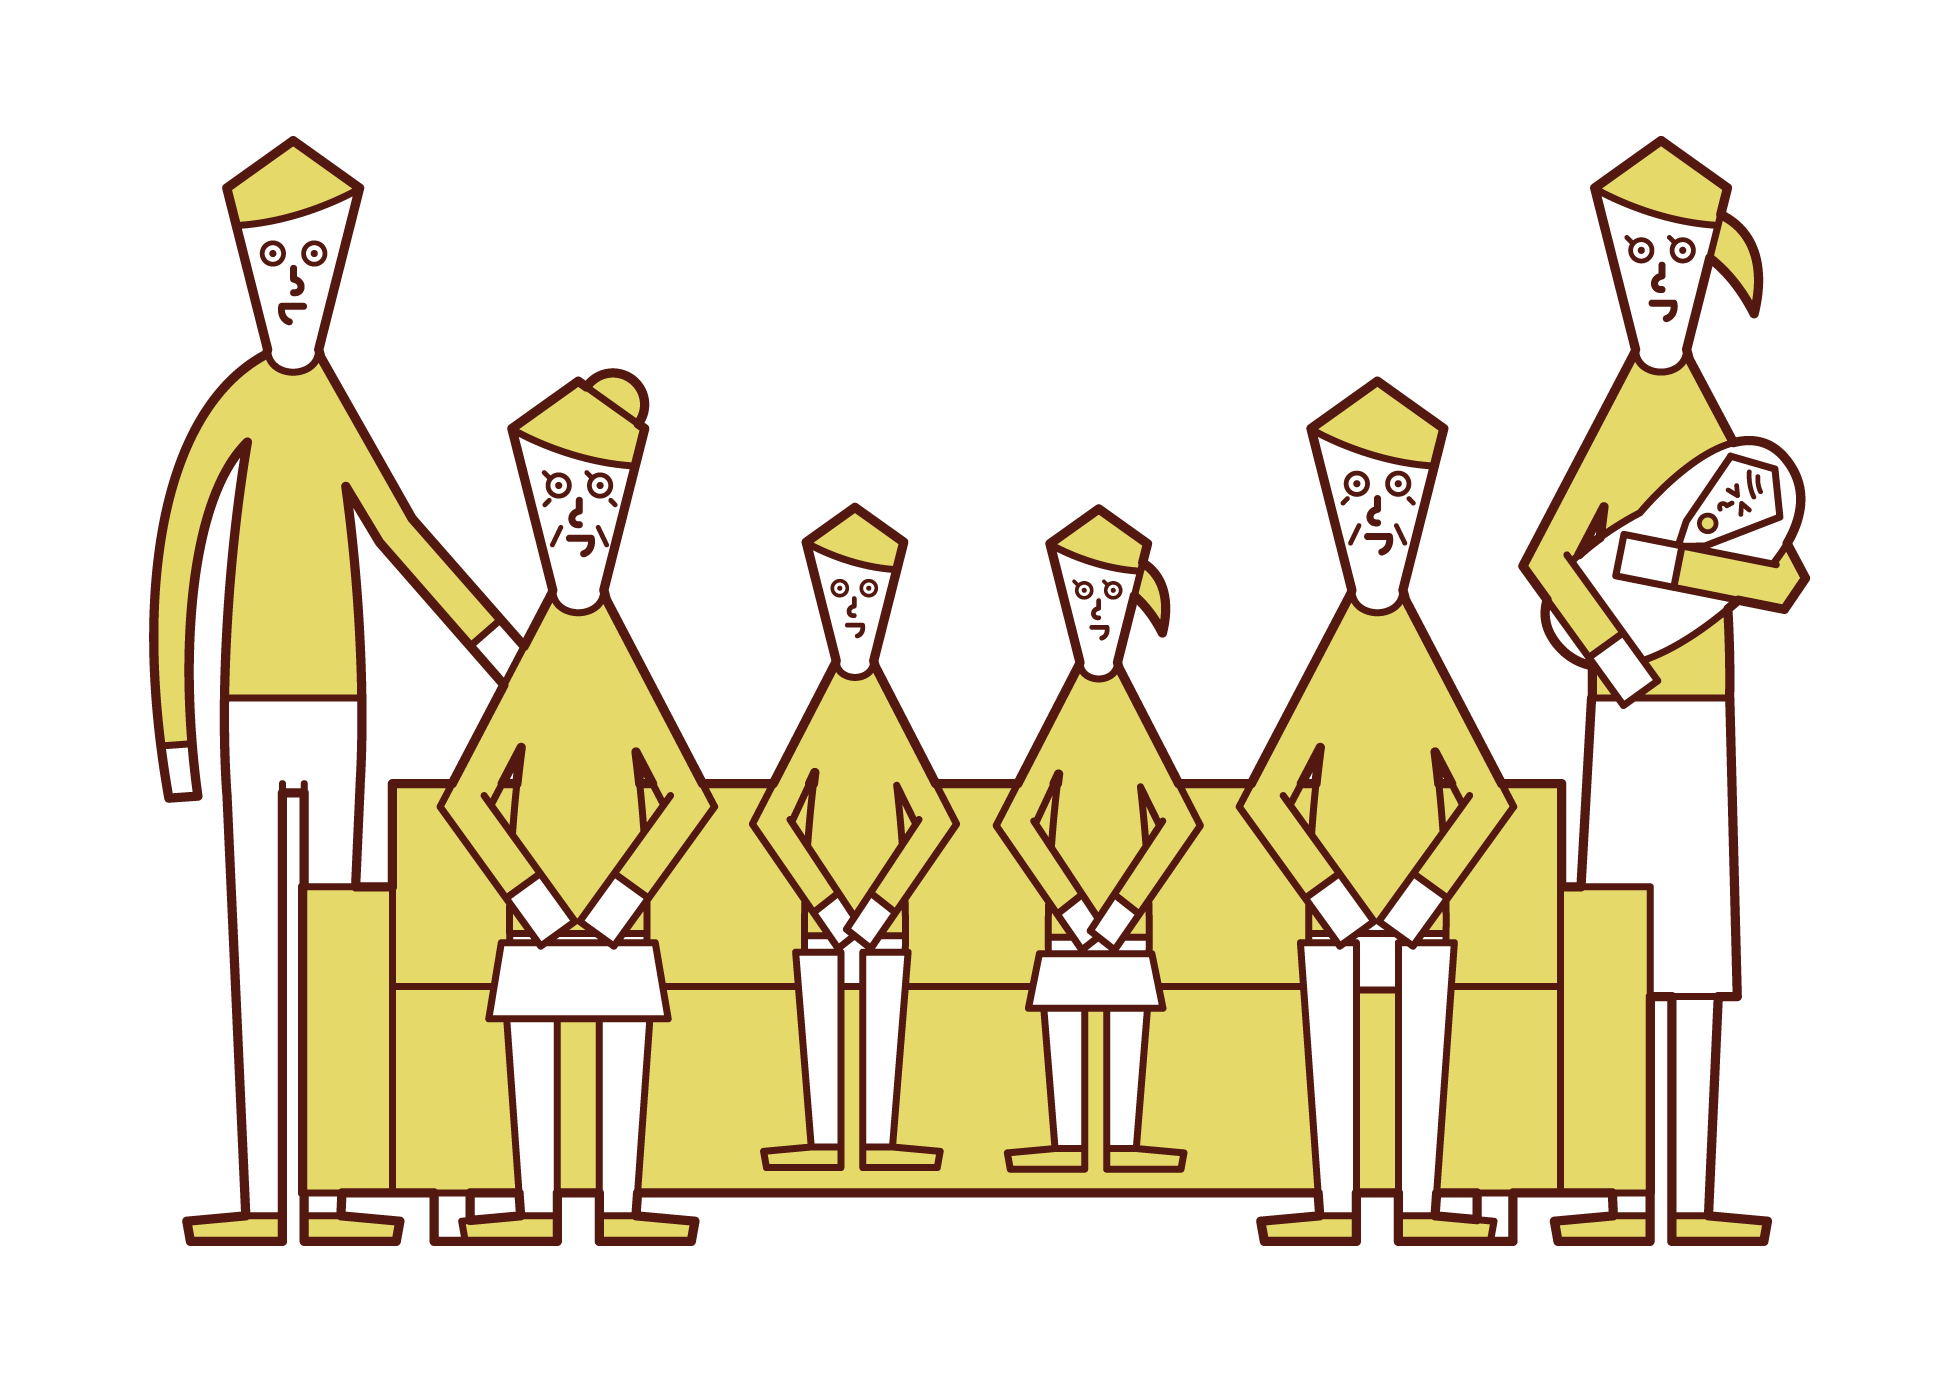 Illustration of a large family